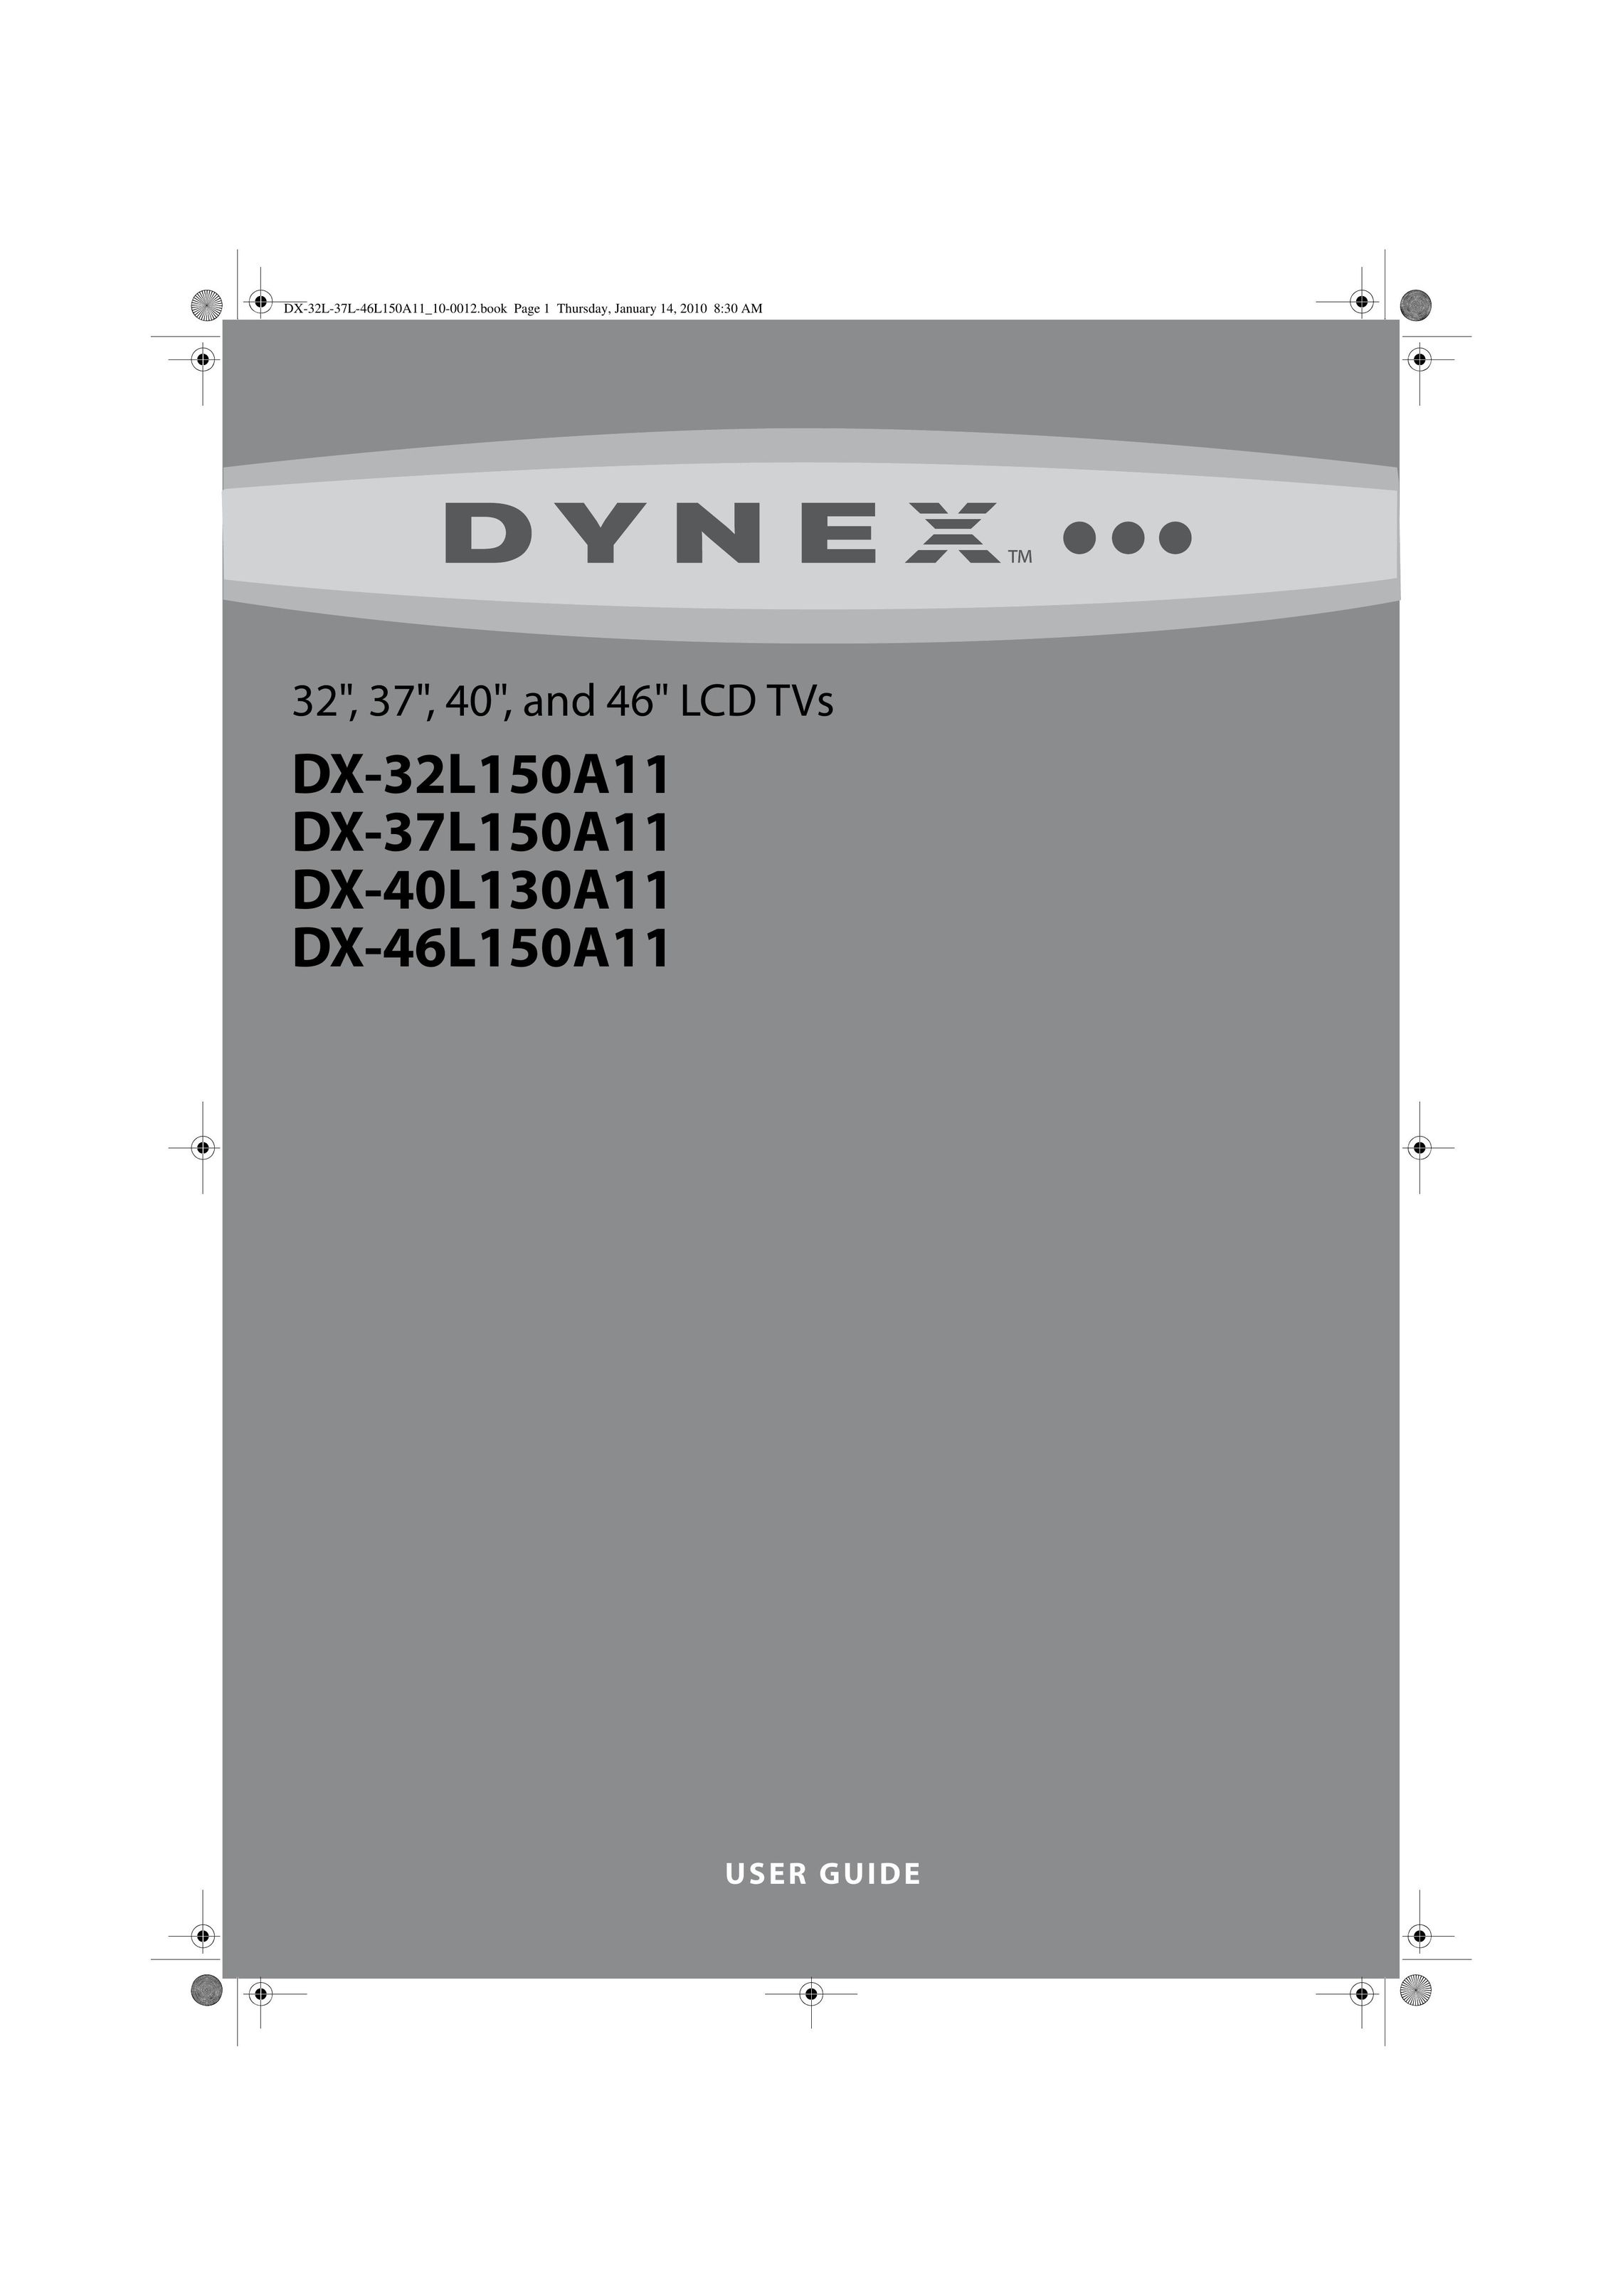 Dynex DX-32L150A11 Flat Panel Television User Manual (Page 1)